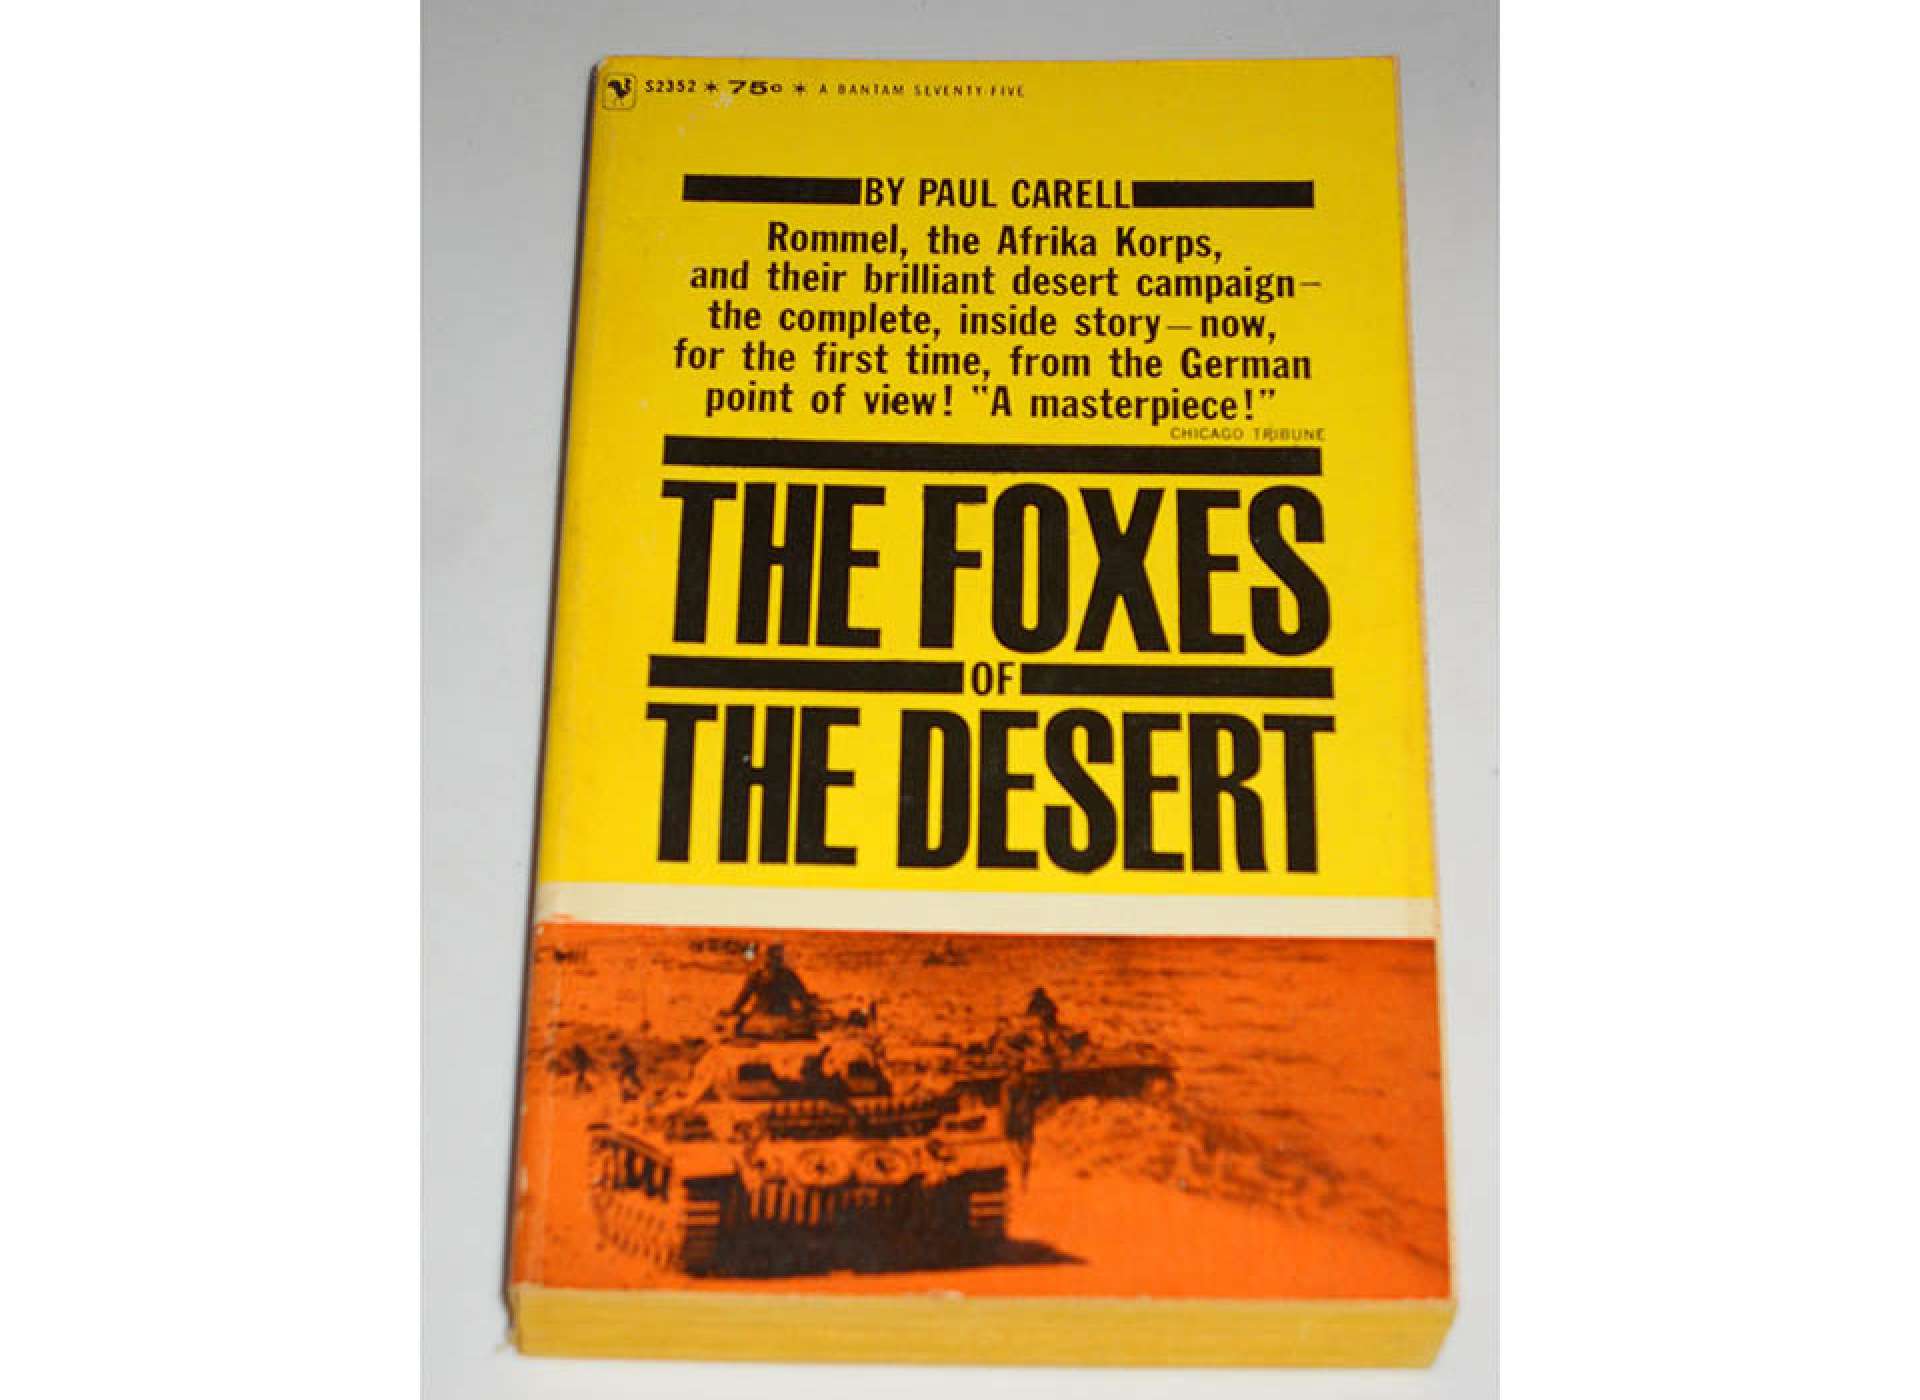 The Foxes of the Desert. Courtesy of Amazon.com